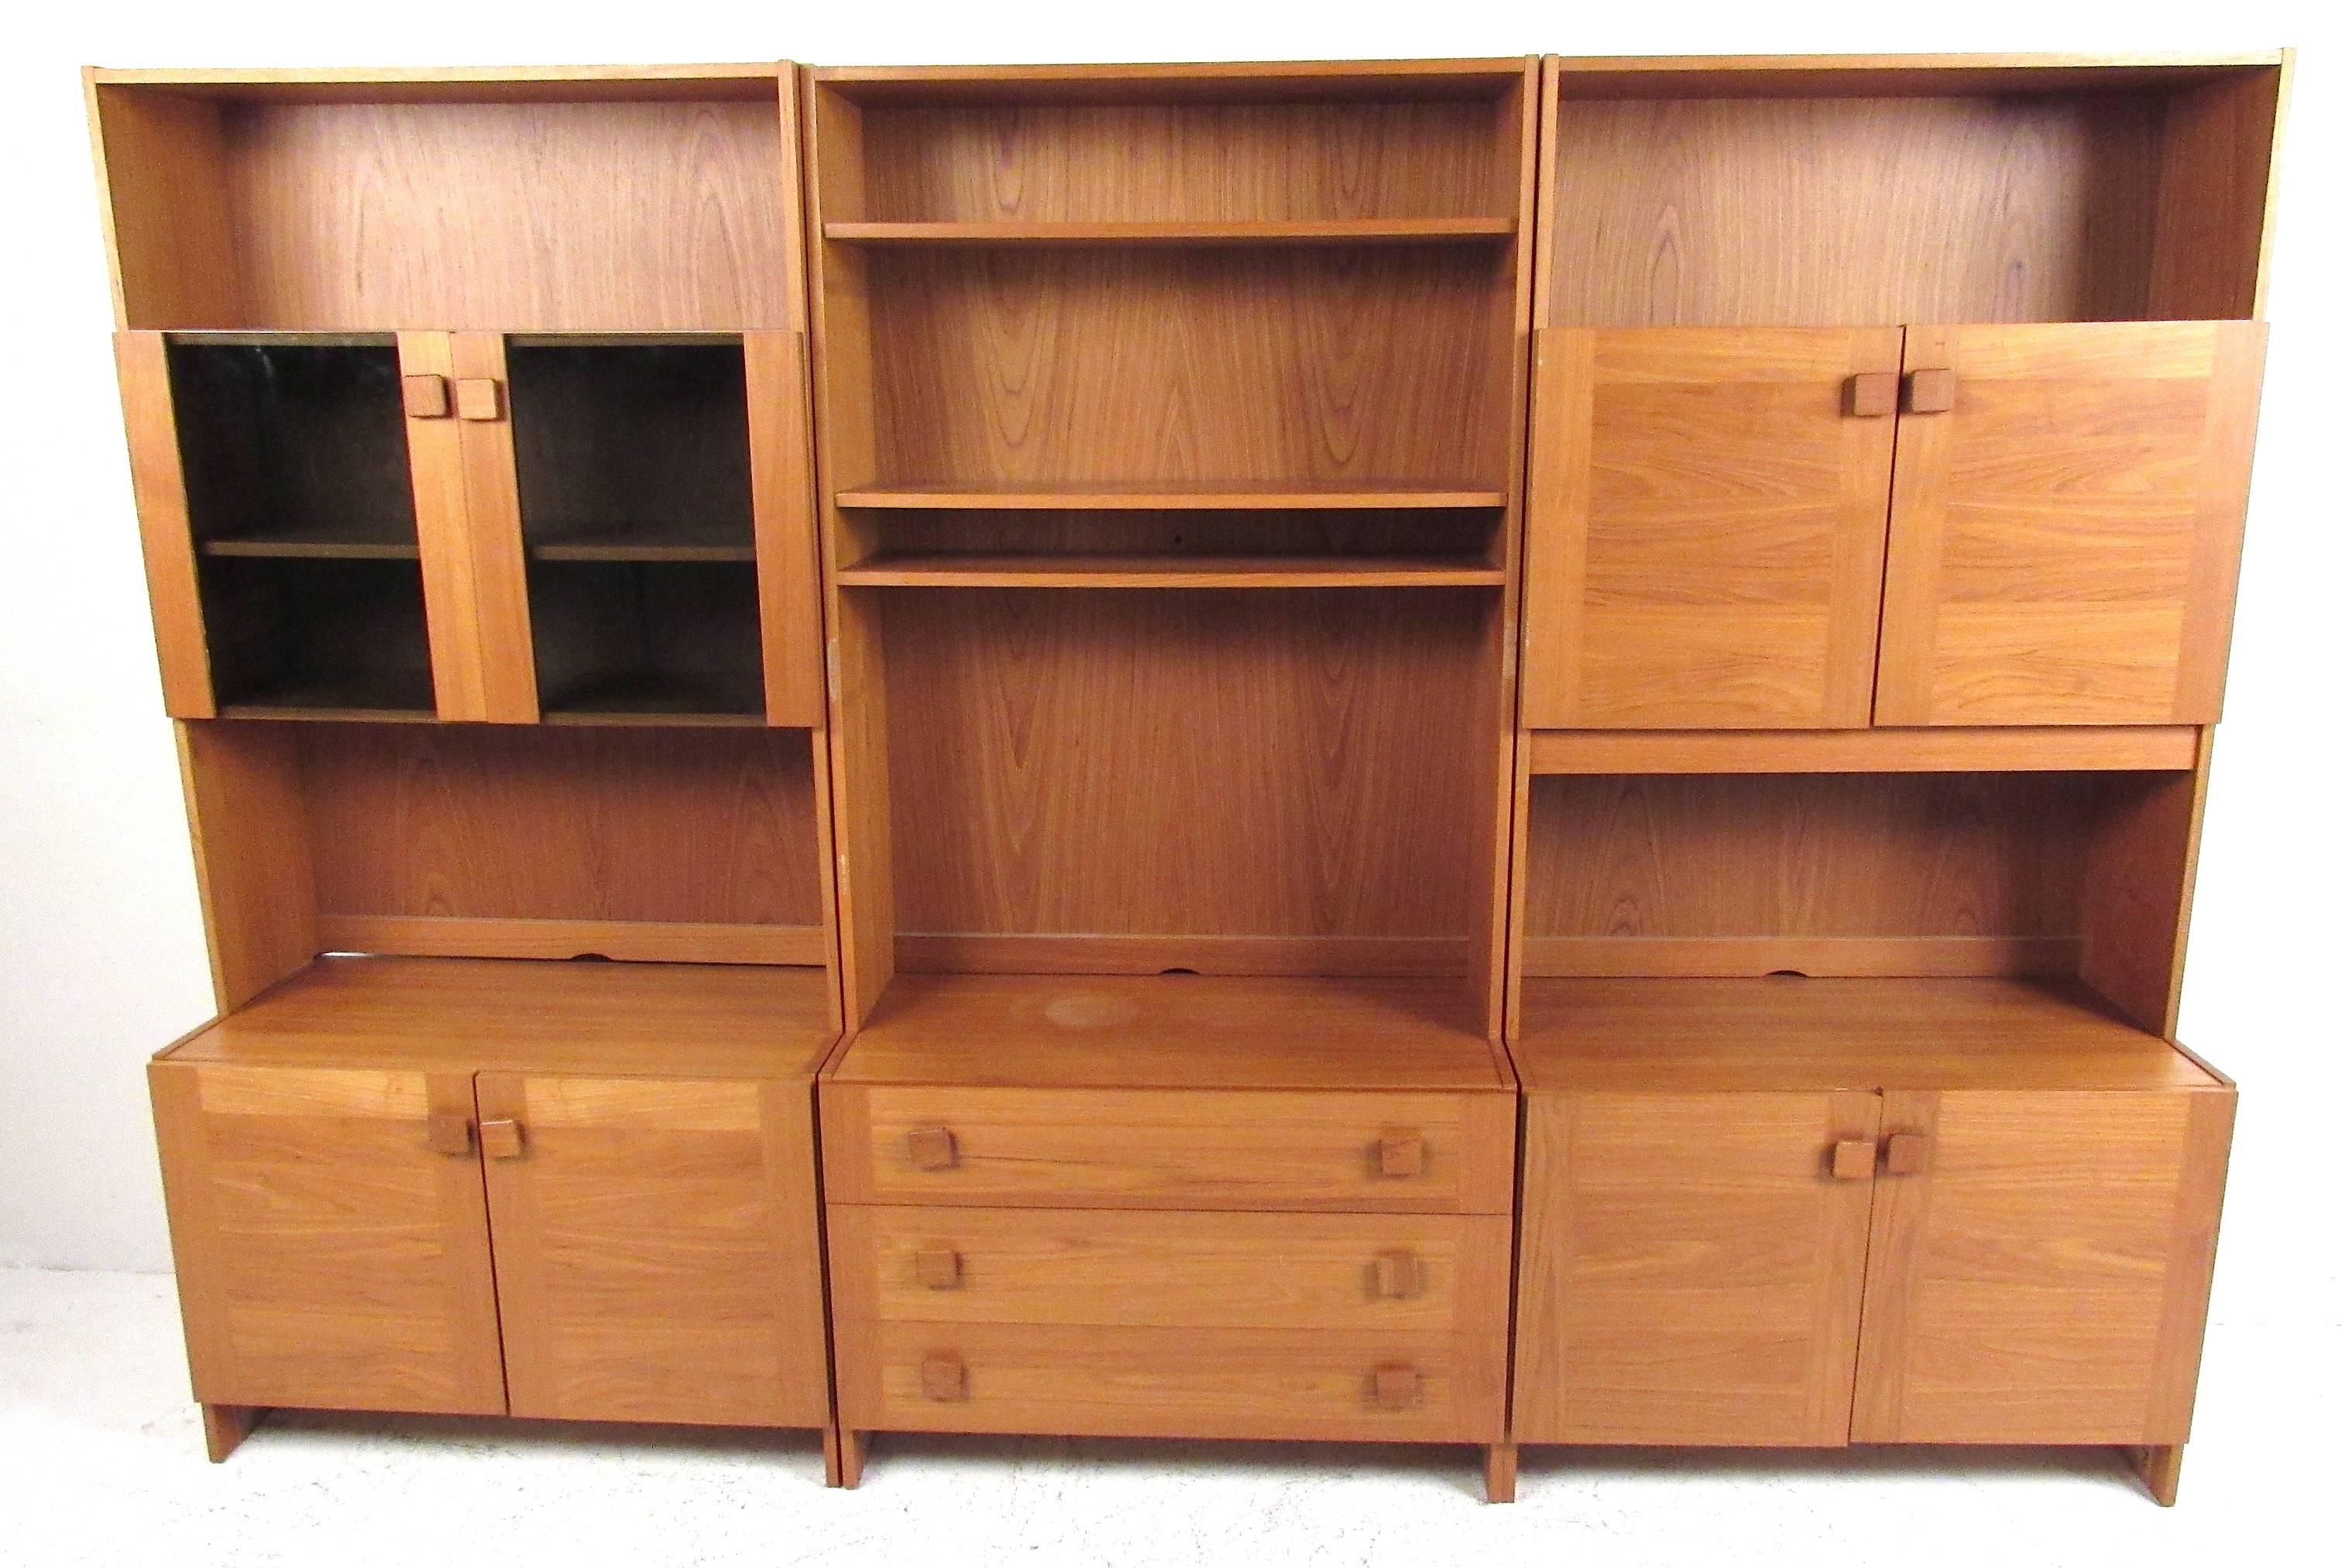 Impressive freestanding teak modular wall unit providing multiple storage and configuration options. The three base and upper cabinets can be arranged as shown or as individual stand alone units, and are also interchangeable enabling maximum